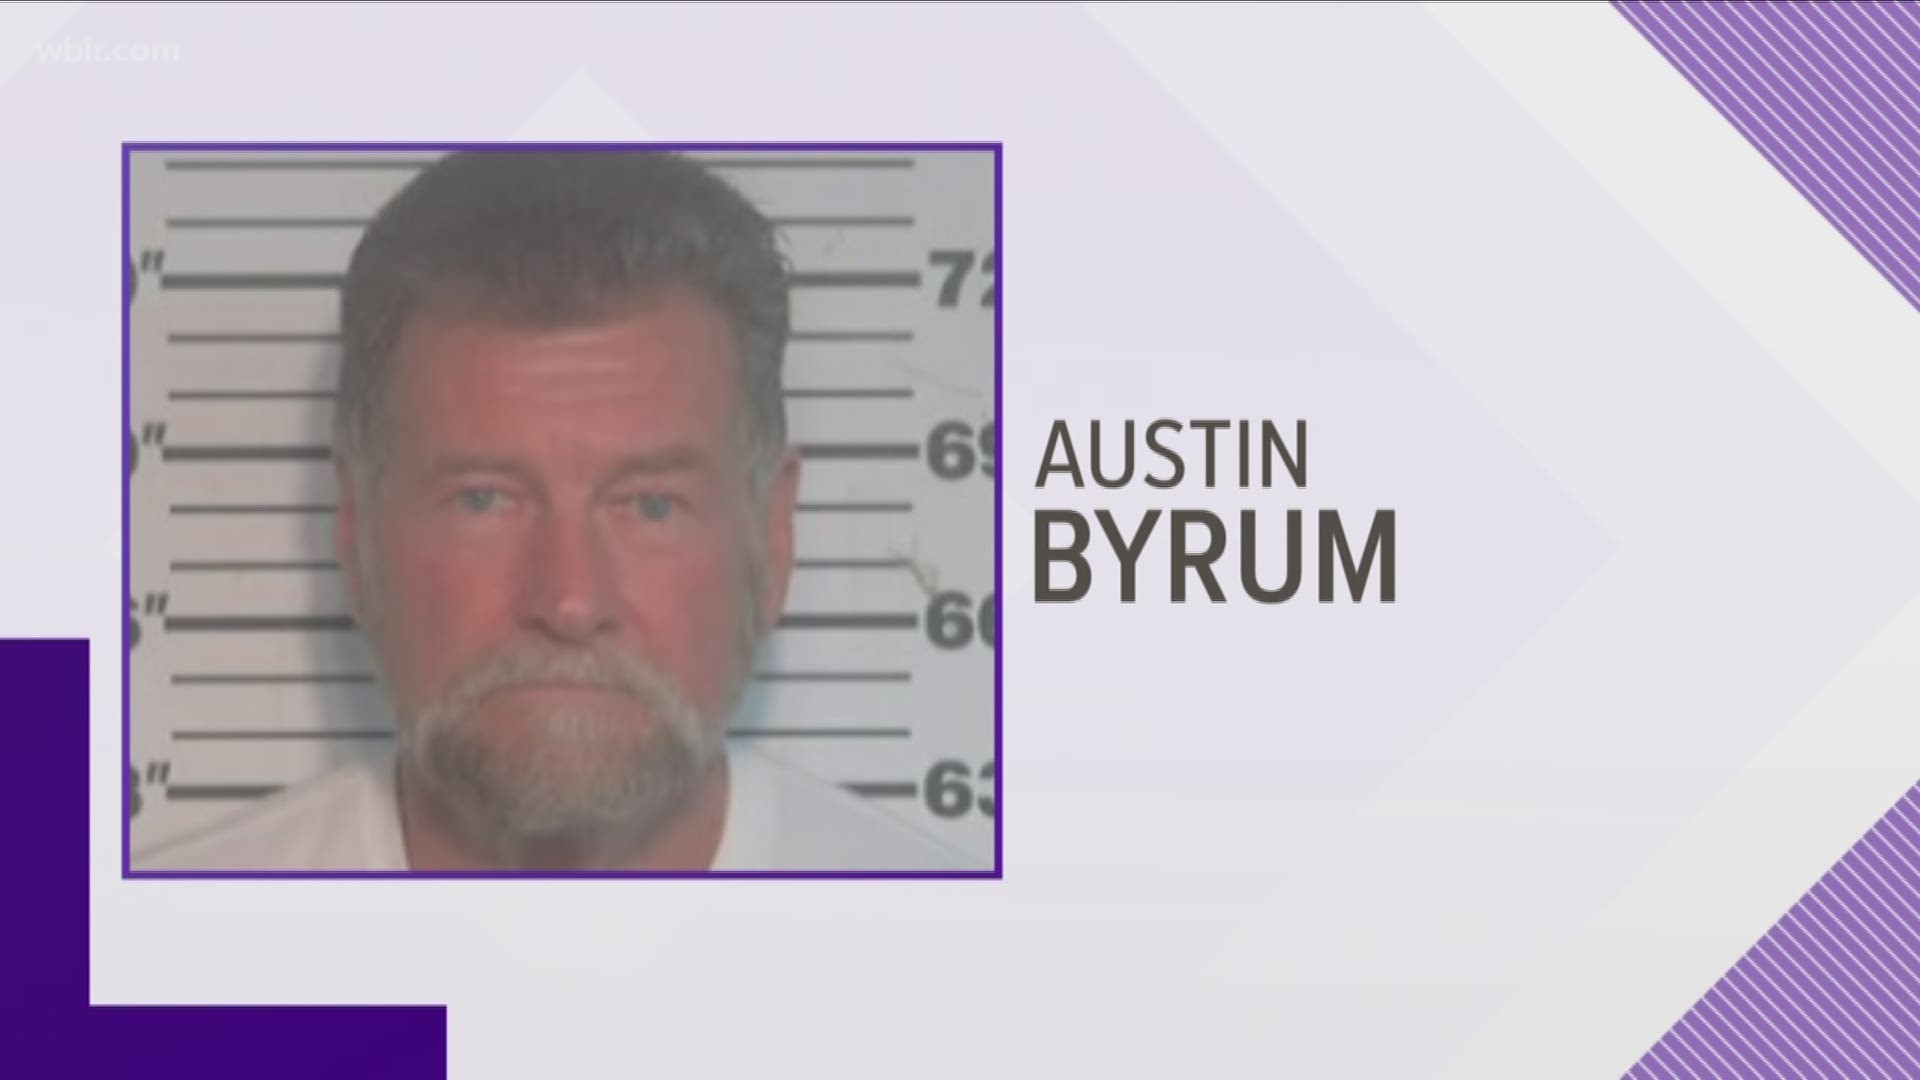 On Aug. 30, 2016, allegations of official misconduct were made against Austin Byrum, Jr. At the time, the TBI said Byrum was a captain at the Monroe County Sheriff's Office.